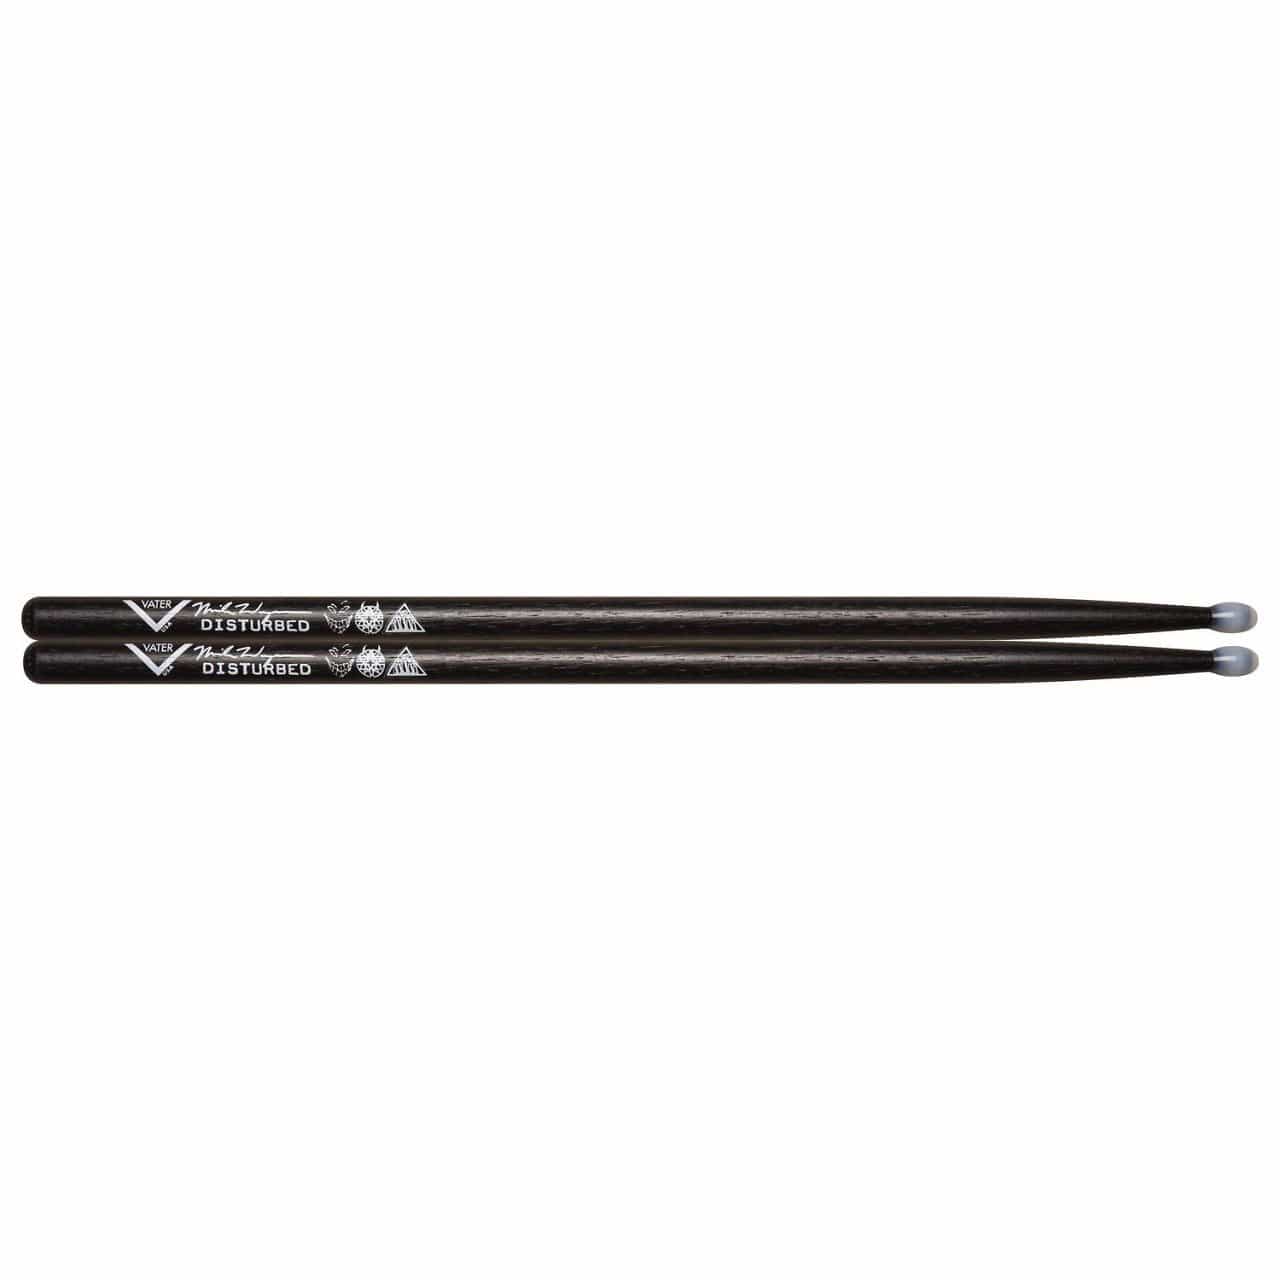 Vater Mike Wengren Signature Nylon Tip Drum Sticks Drums and Percussion / Parts and Accessories / Drum Sticks and Mallets